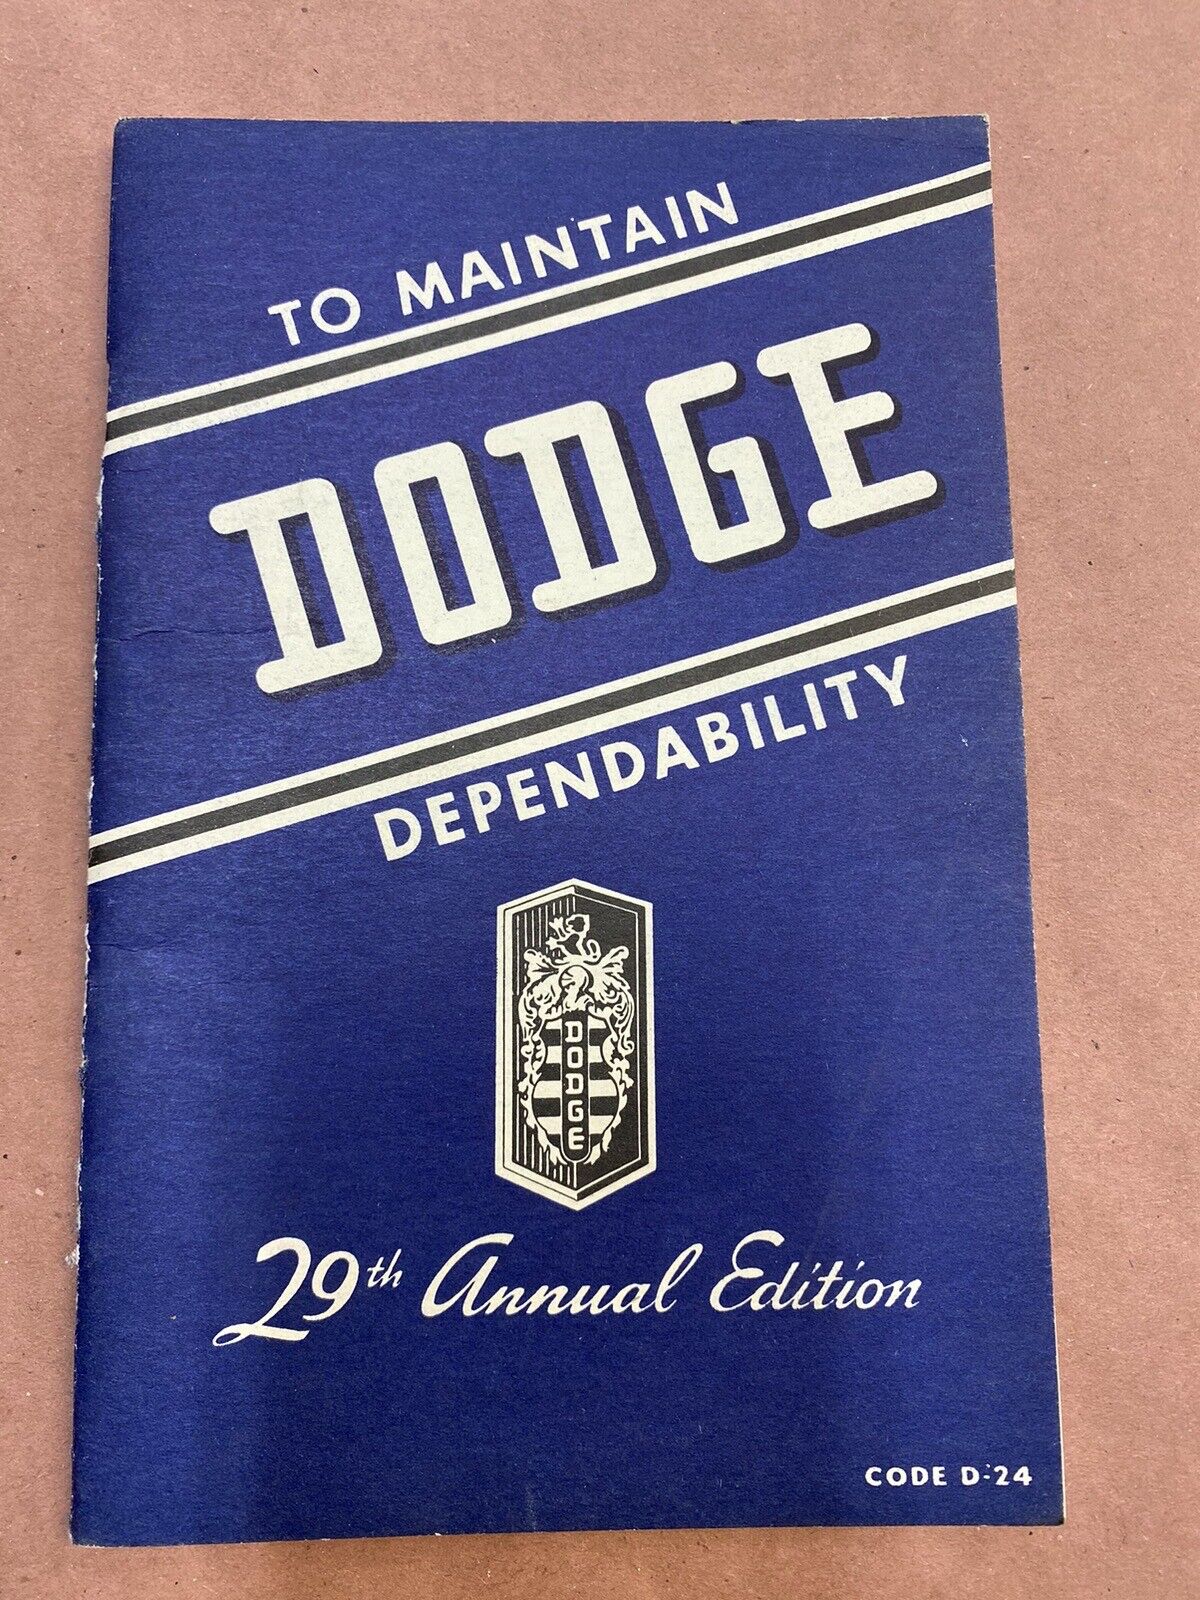 1946 How To Maintain Dodge Dependability 29th Annual Edition Code D-24 (USED)